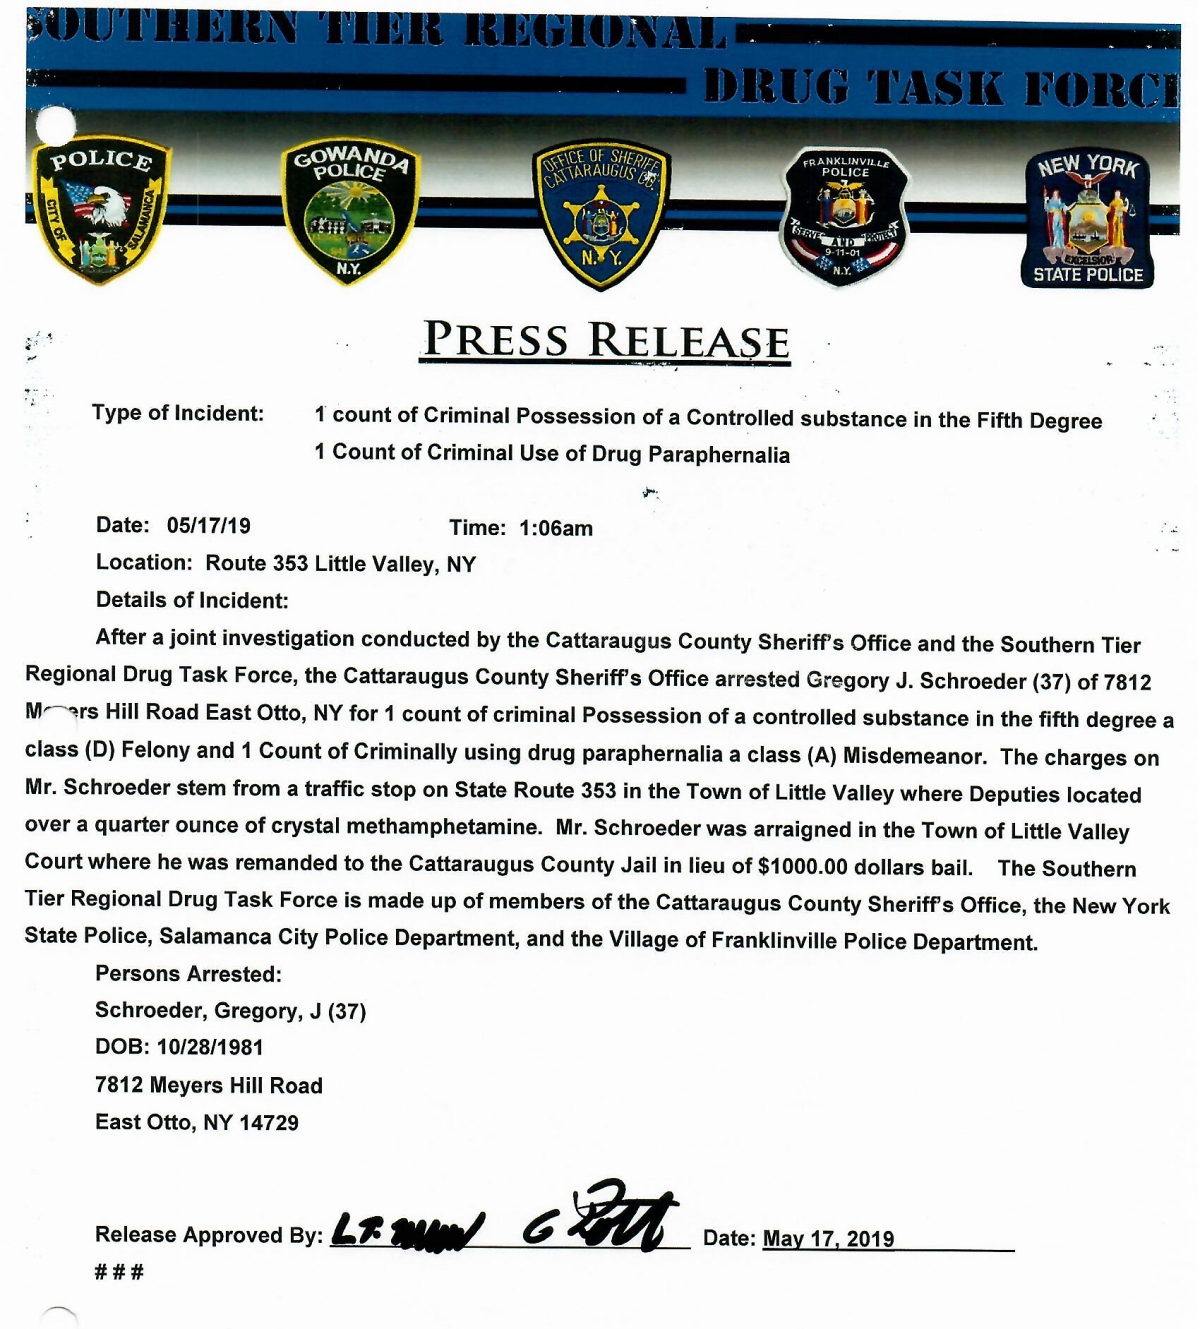 Sheriff's office press release about criminal possession of controlled substance in Little Valley